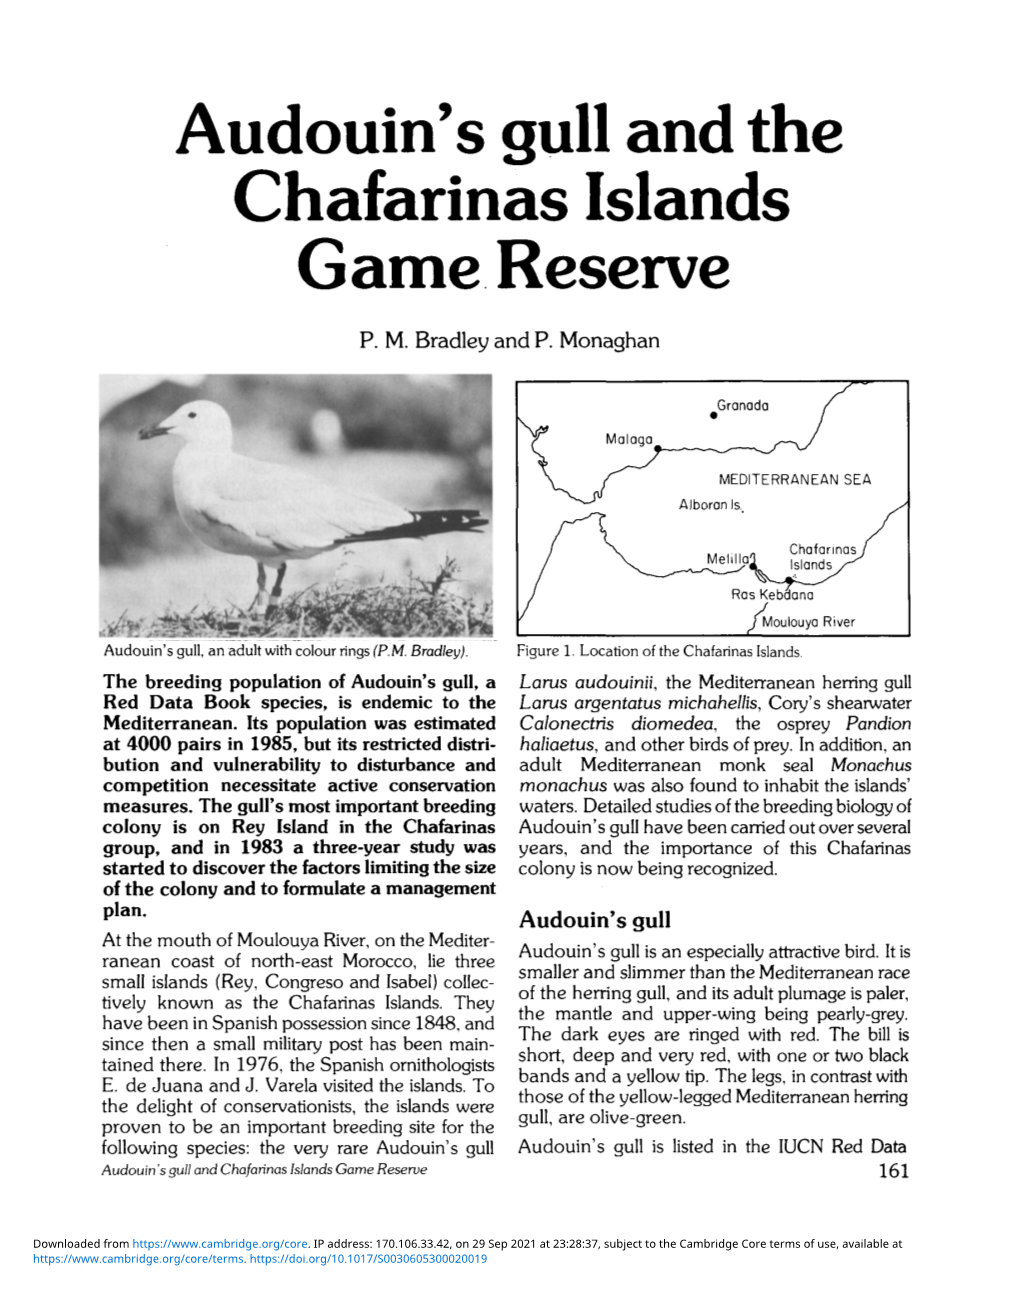 Audouin's Gull and the Chafarinas Islands Game Reserve P